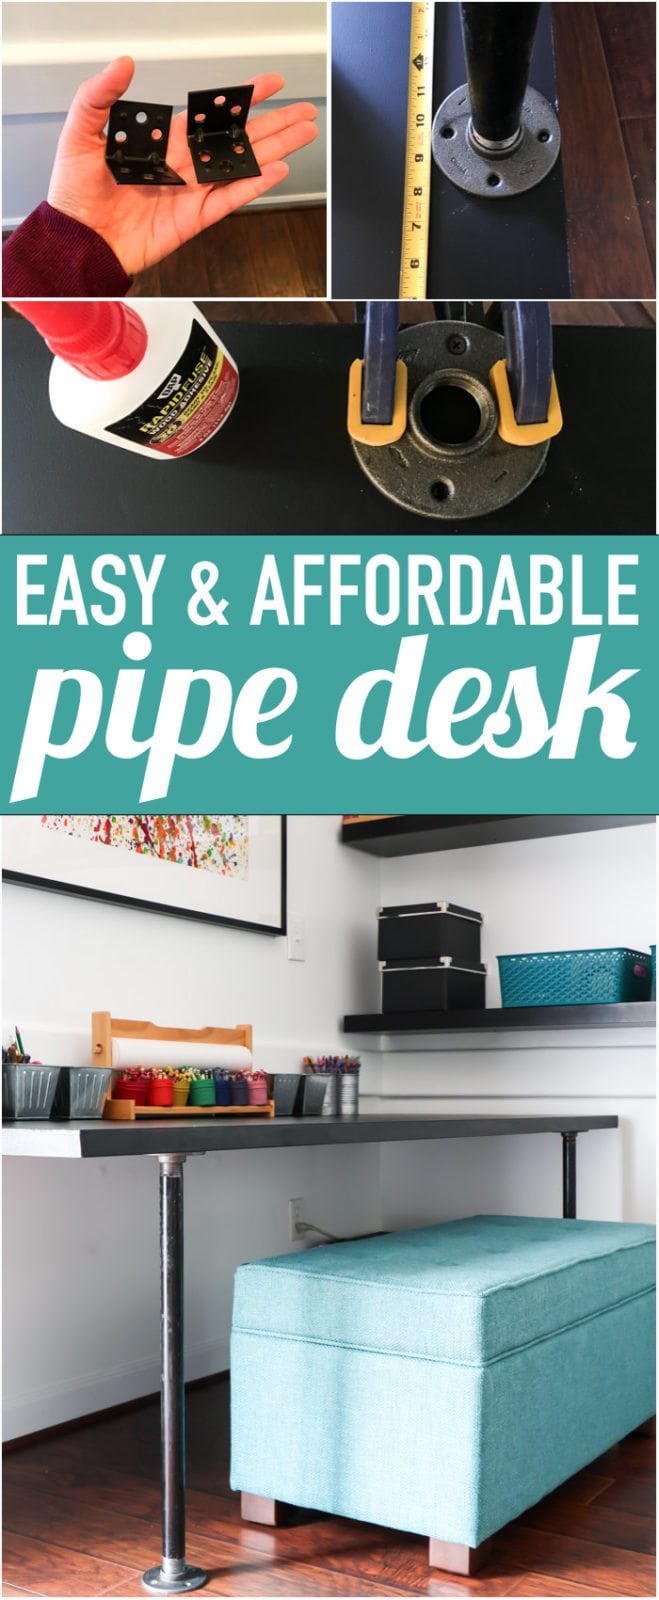 Best and most clever DIY pipe desk tutorial I have seen! Such an affordable way to make any pipe desk or pipe table. Can't wait to show my husband so we can do it!